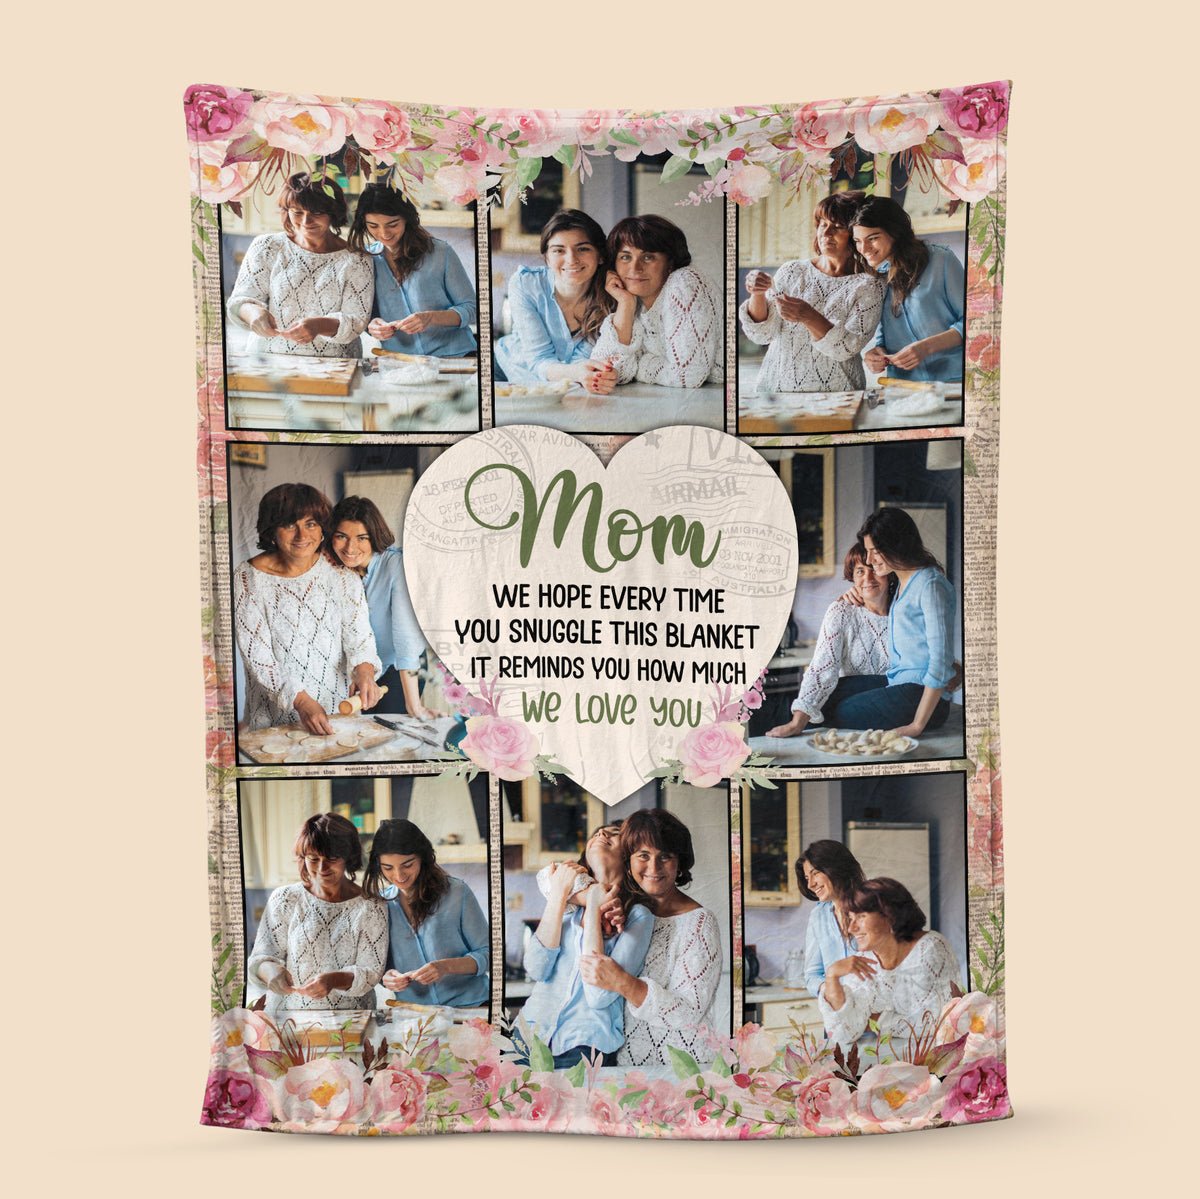 Customized Mom Blanket -  Mom We Hope This Reminds You How Much We Love You - Giftago - 1